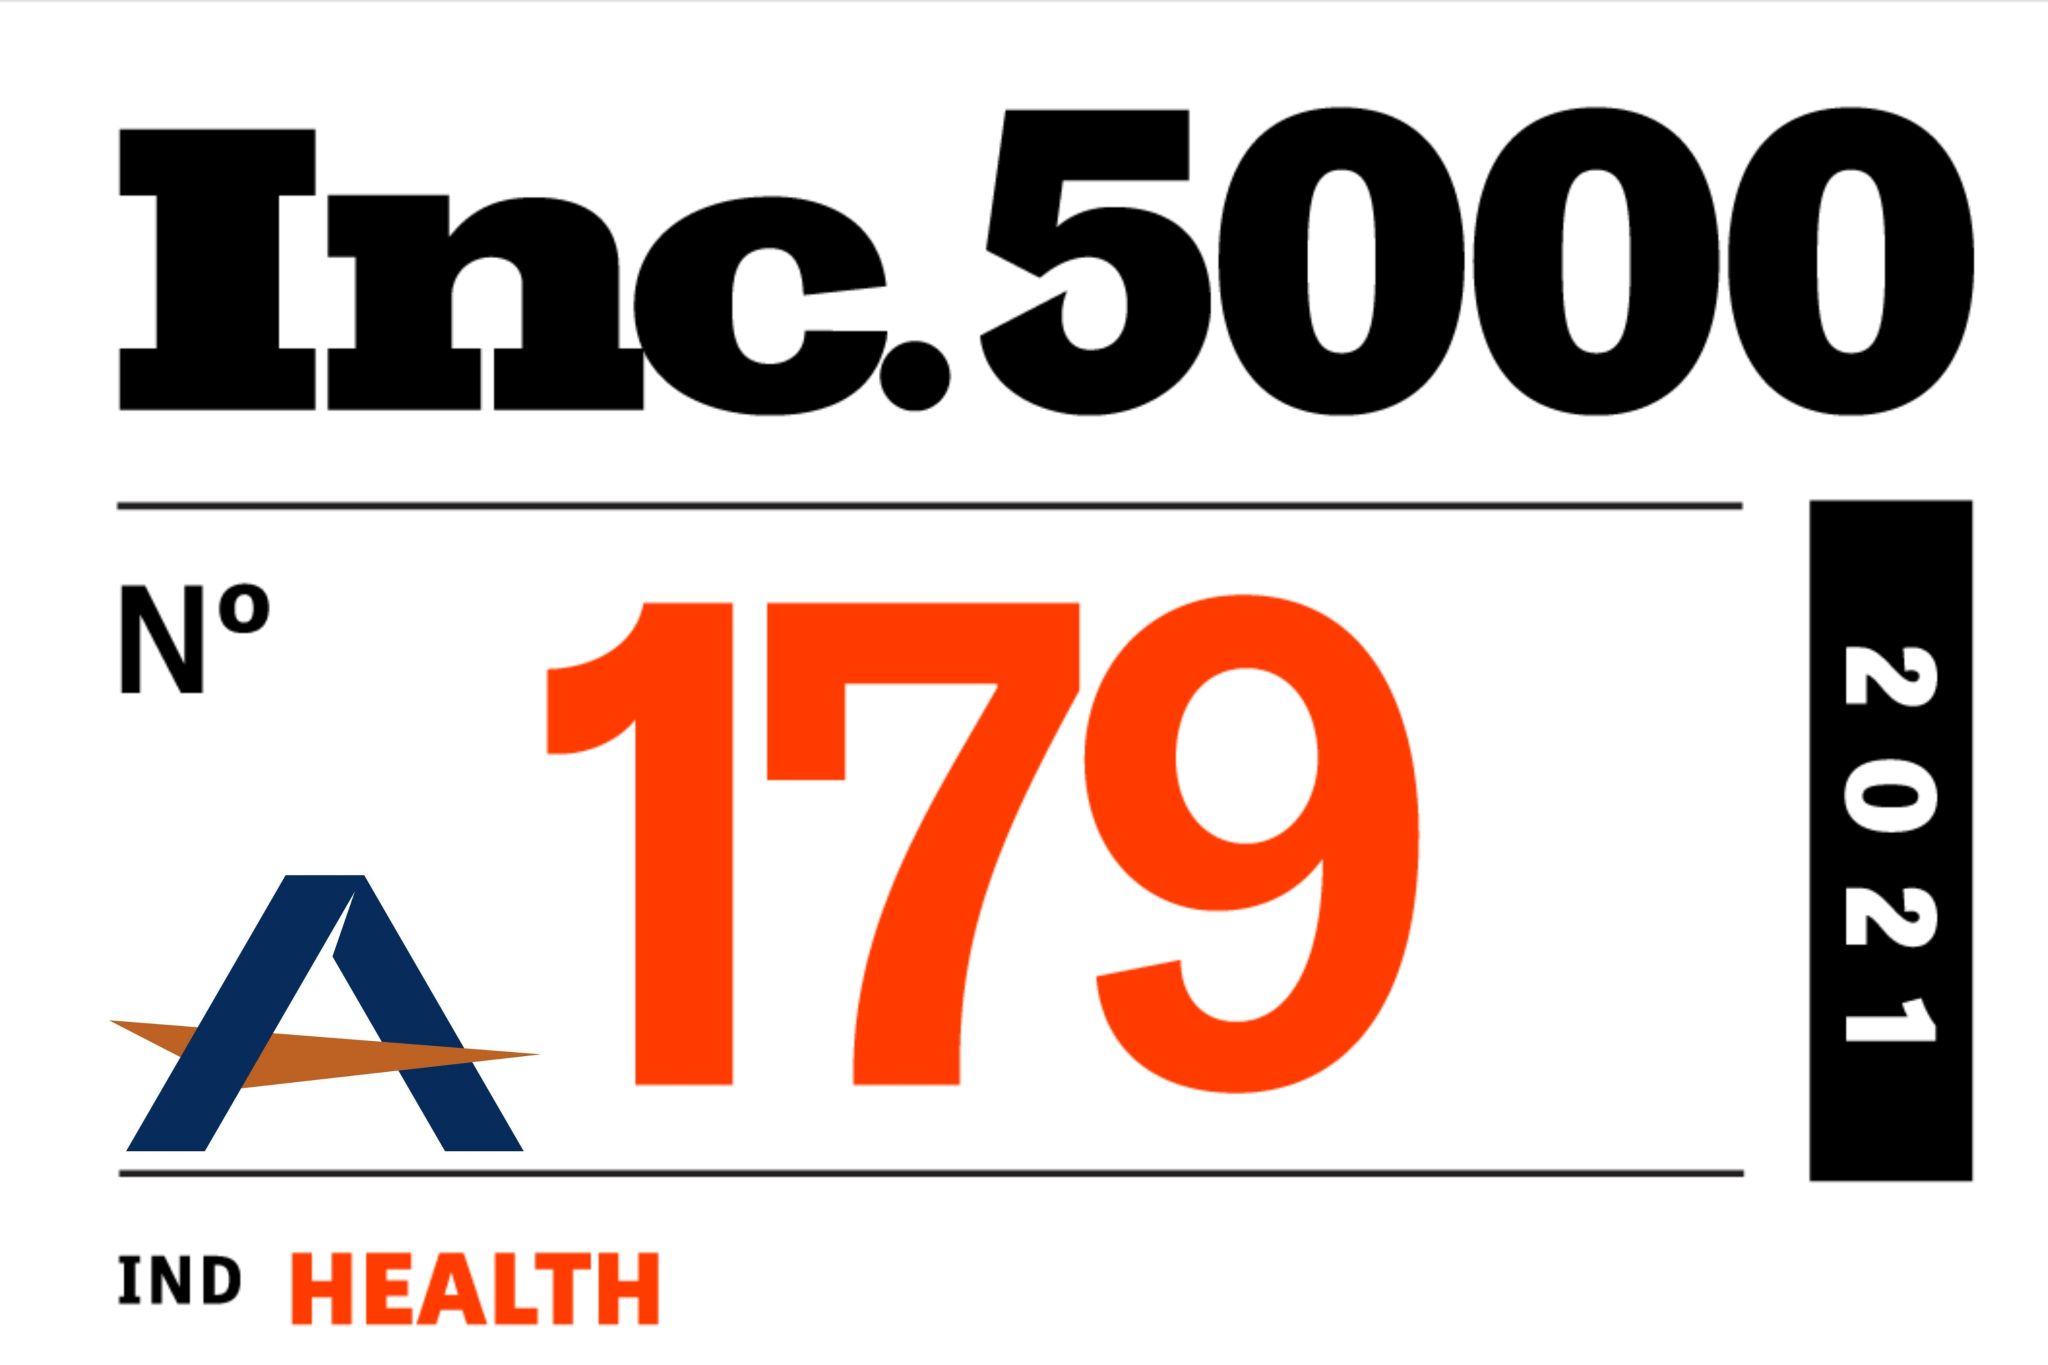 Affinity Dental Management named to the Inc. 5000's Fastest Growing Private Companies for the Second Year in a Row